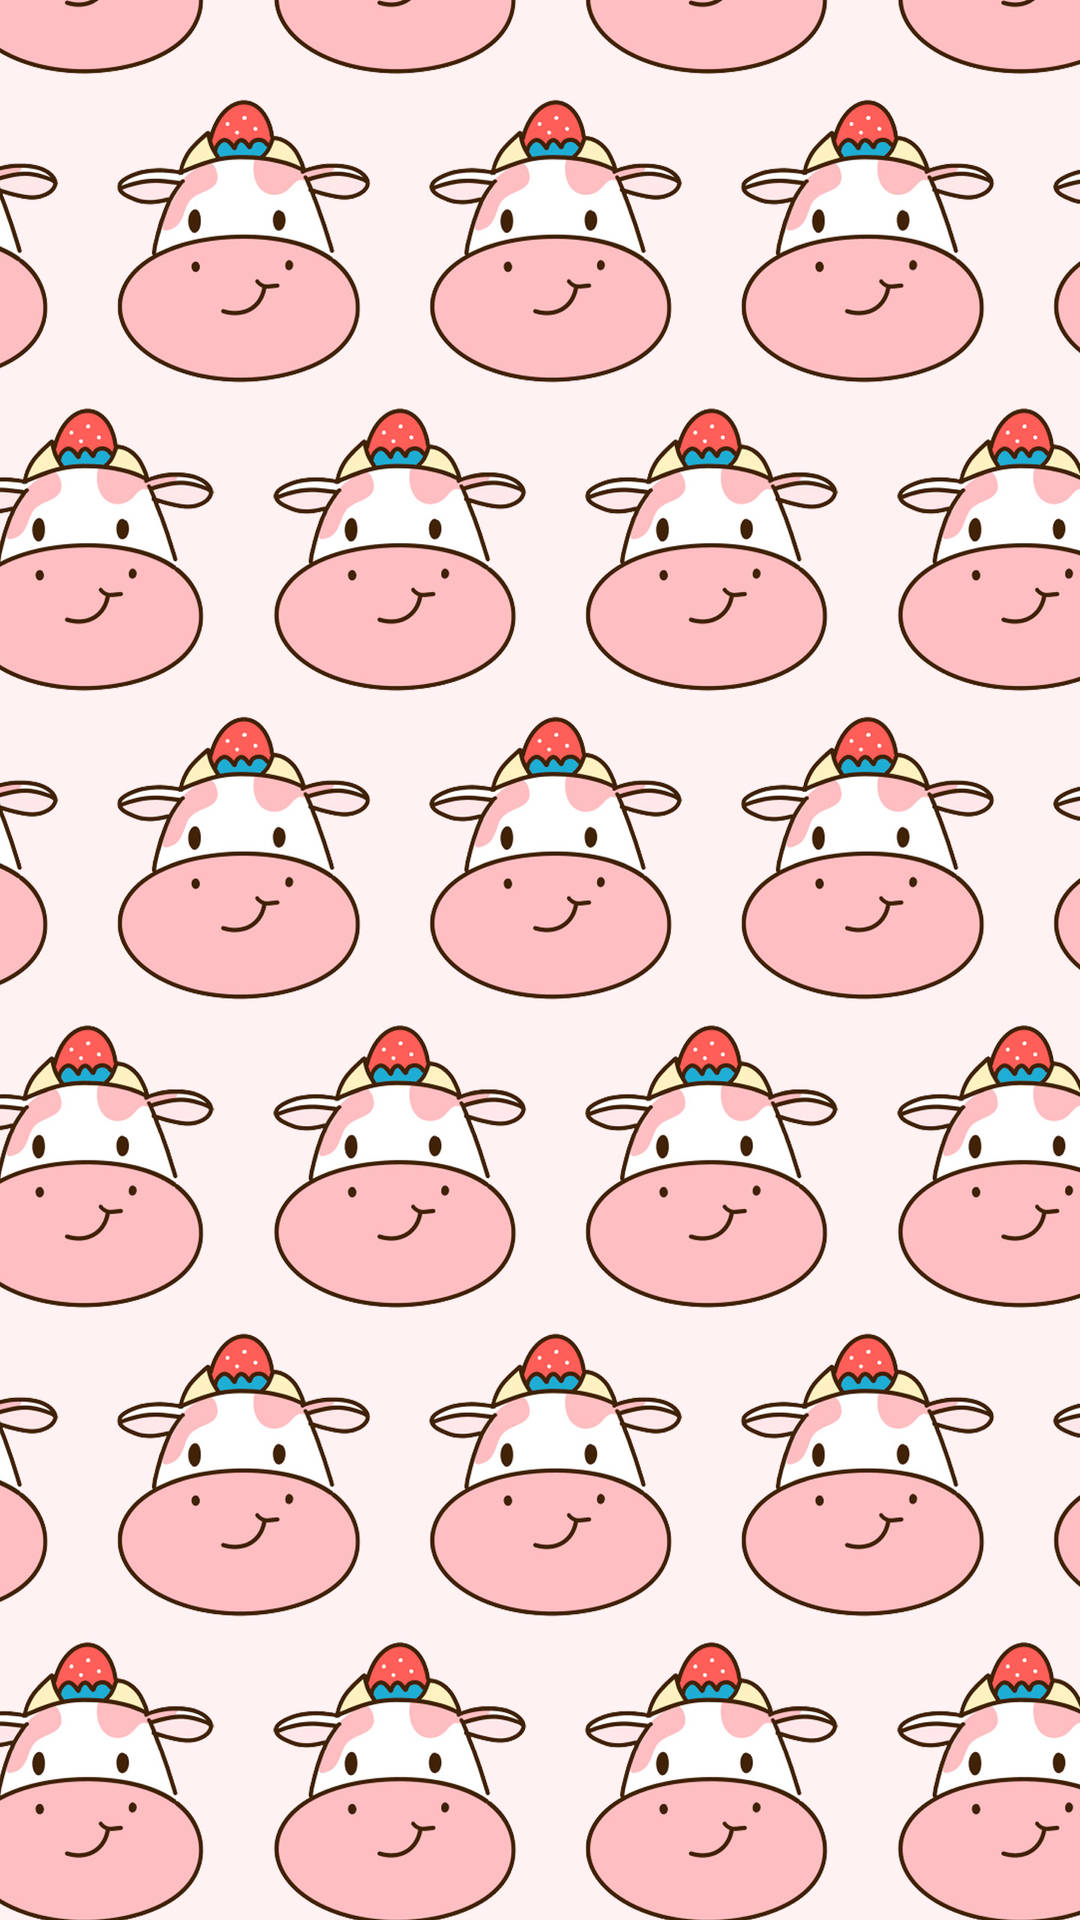 Smiling Strawberry Cow Tiled Pattern Wallpaper